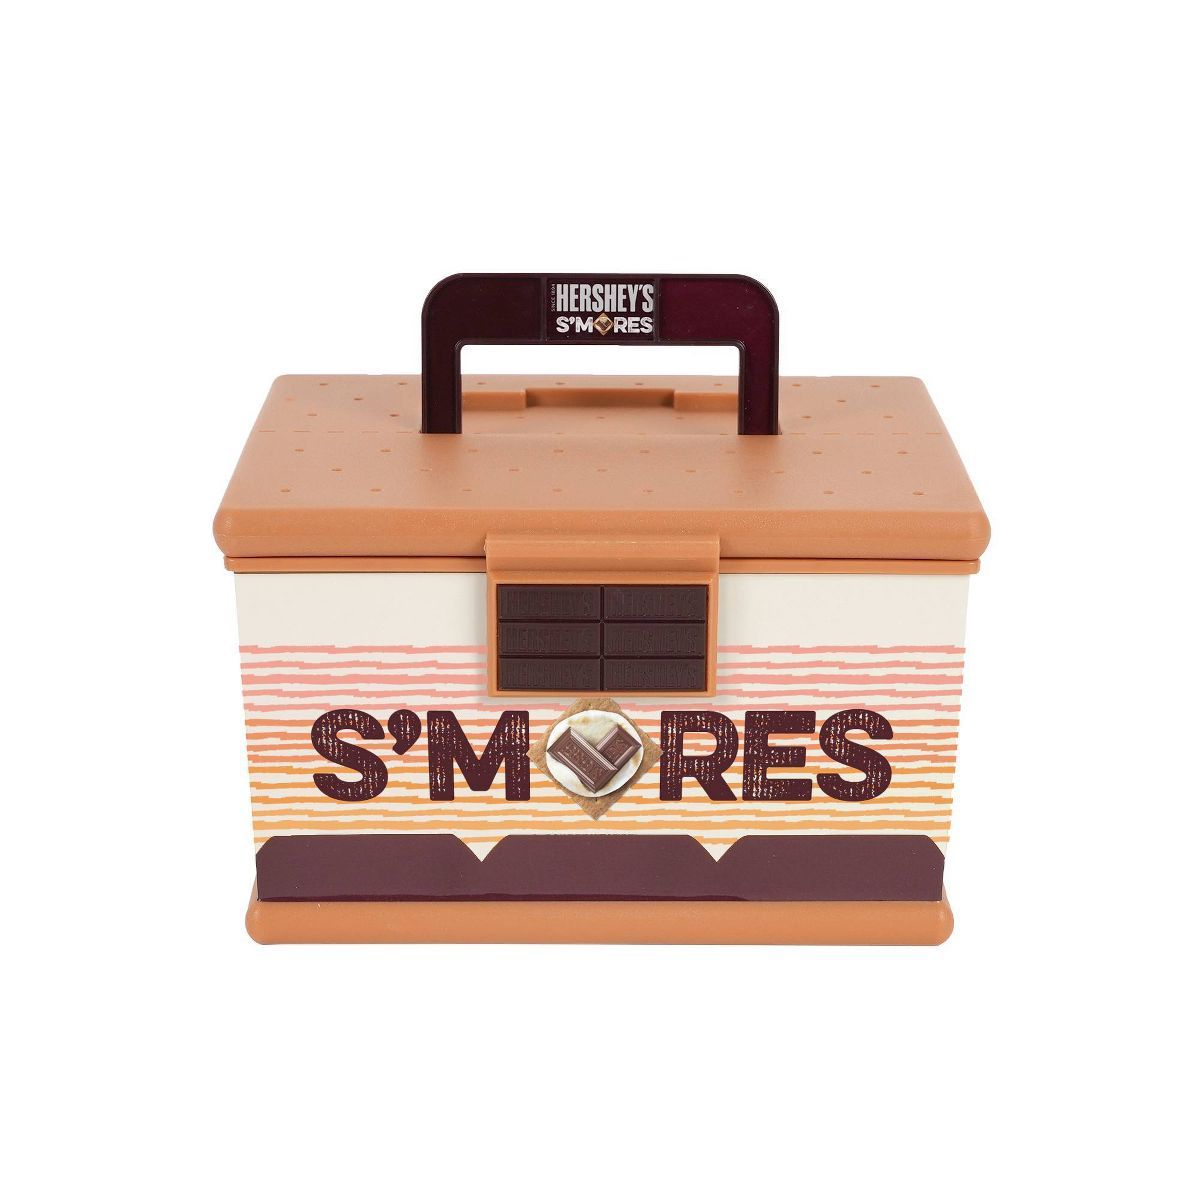 Hershey's Deluxe S'mores Caddy: Airtight, Portable Storage for Ingredients with Easy-Grip Handle | Target